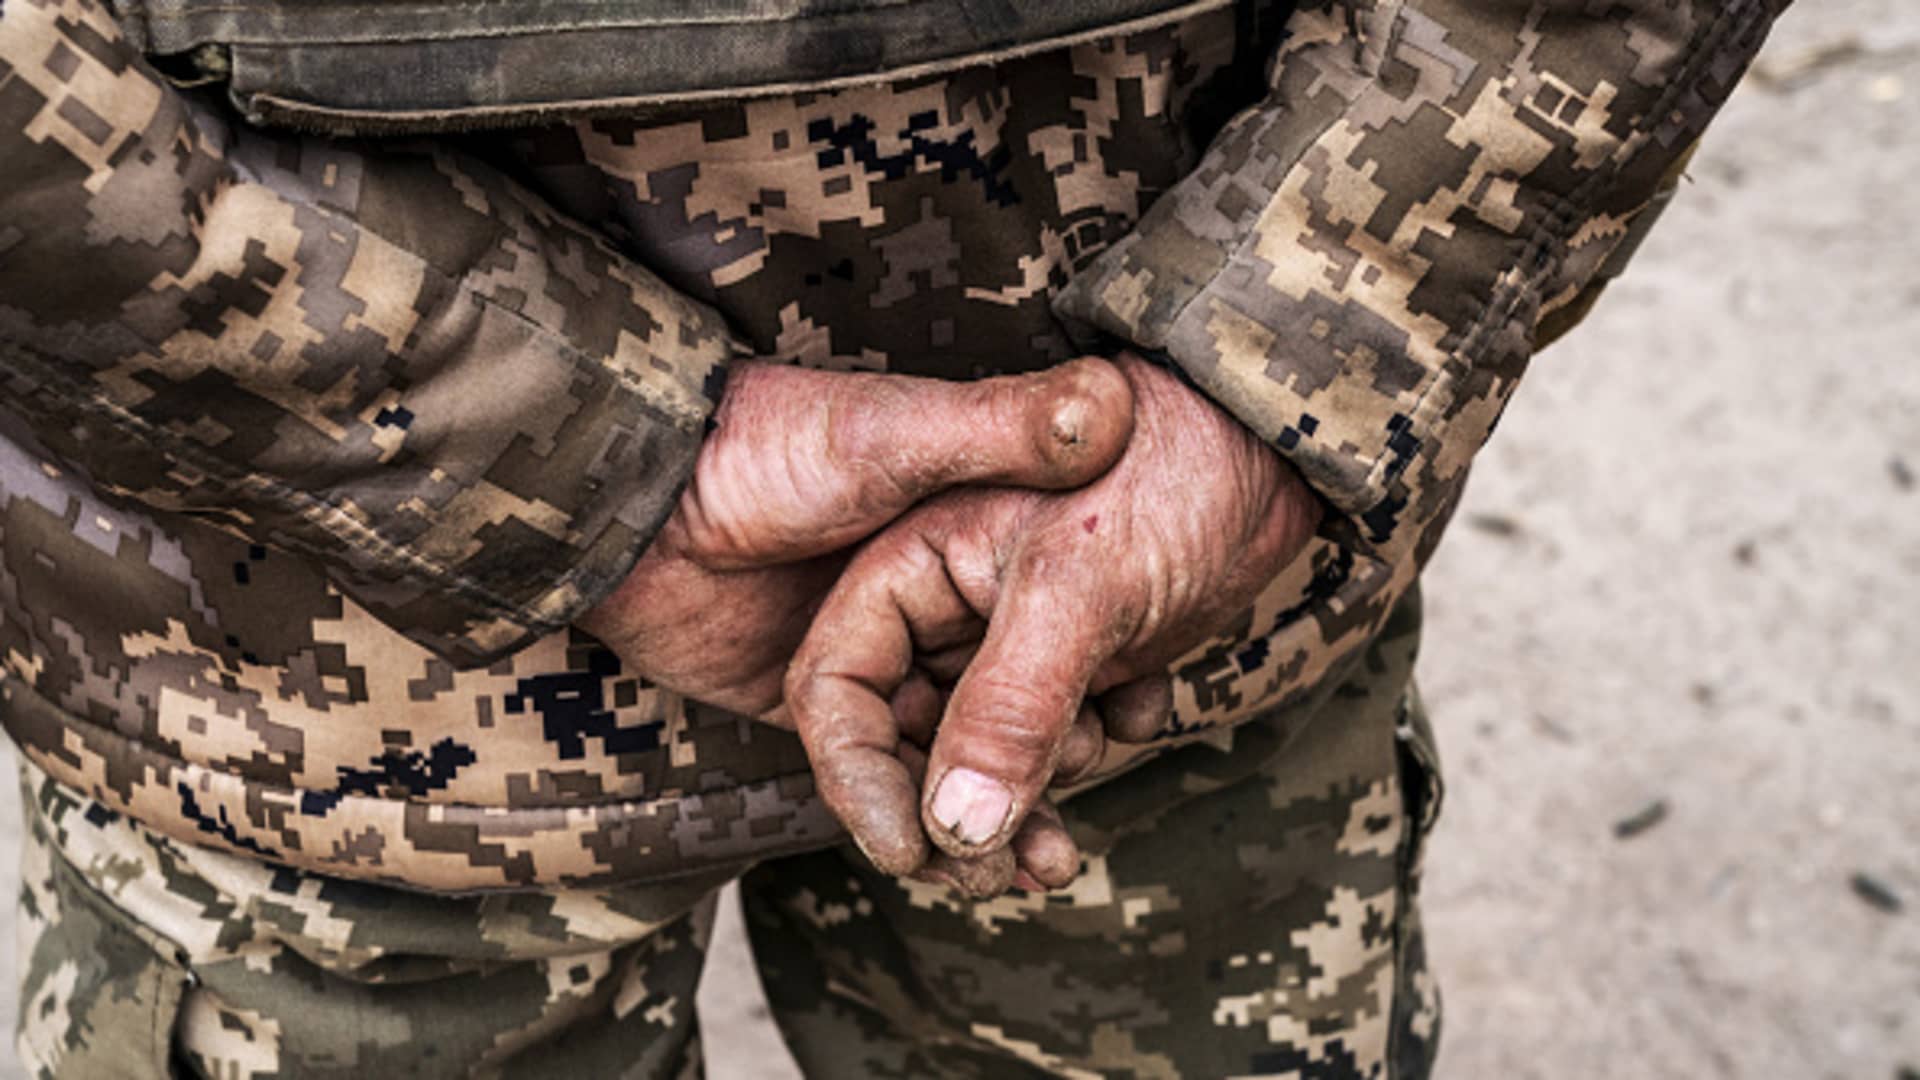 DONETSK OBLAST, UKRAINE - MARCH 06: Hands of a Ukrainian serviceman is seen during a military training drill at an undisclosed location as the war between Russia and Ukraine has been going on for the last 2 years, in Donetsk Oblast, Ukraine on March 06, 2024. (Photo by Jose Colon/Anadolu via Getty Images)